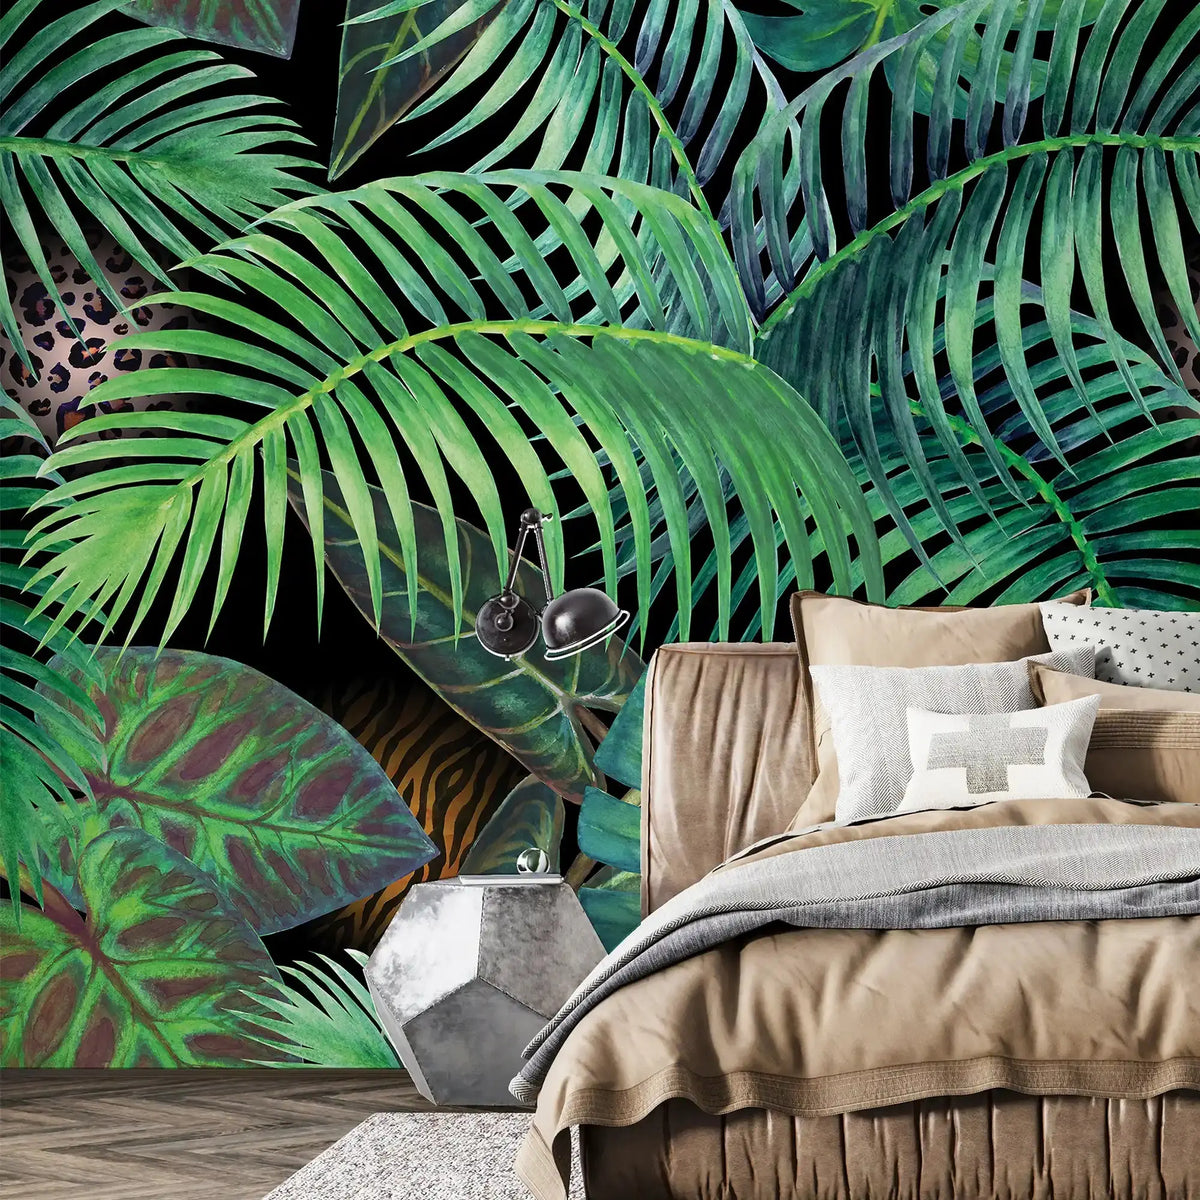 3096-A / Jungle Leaves Wallpaper - Tropical Botanical Wall Decor - Self Adhesive, Peel and Stick - Modern and Contemporary - Artevella